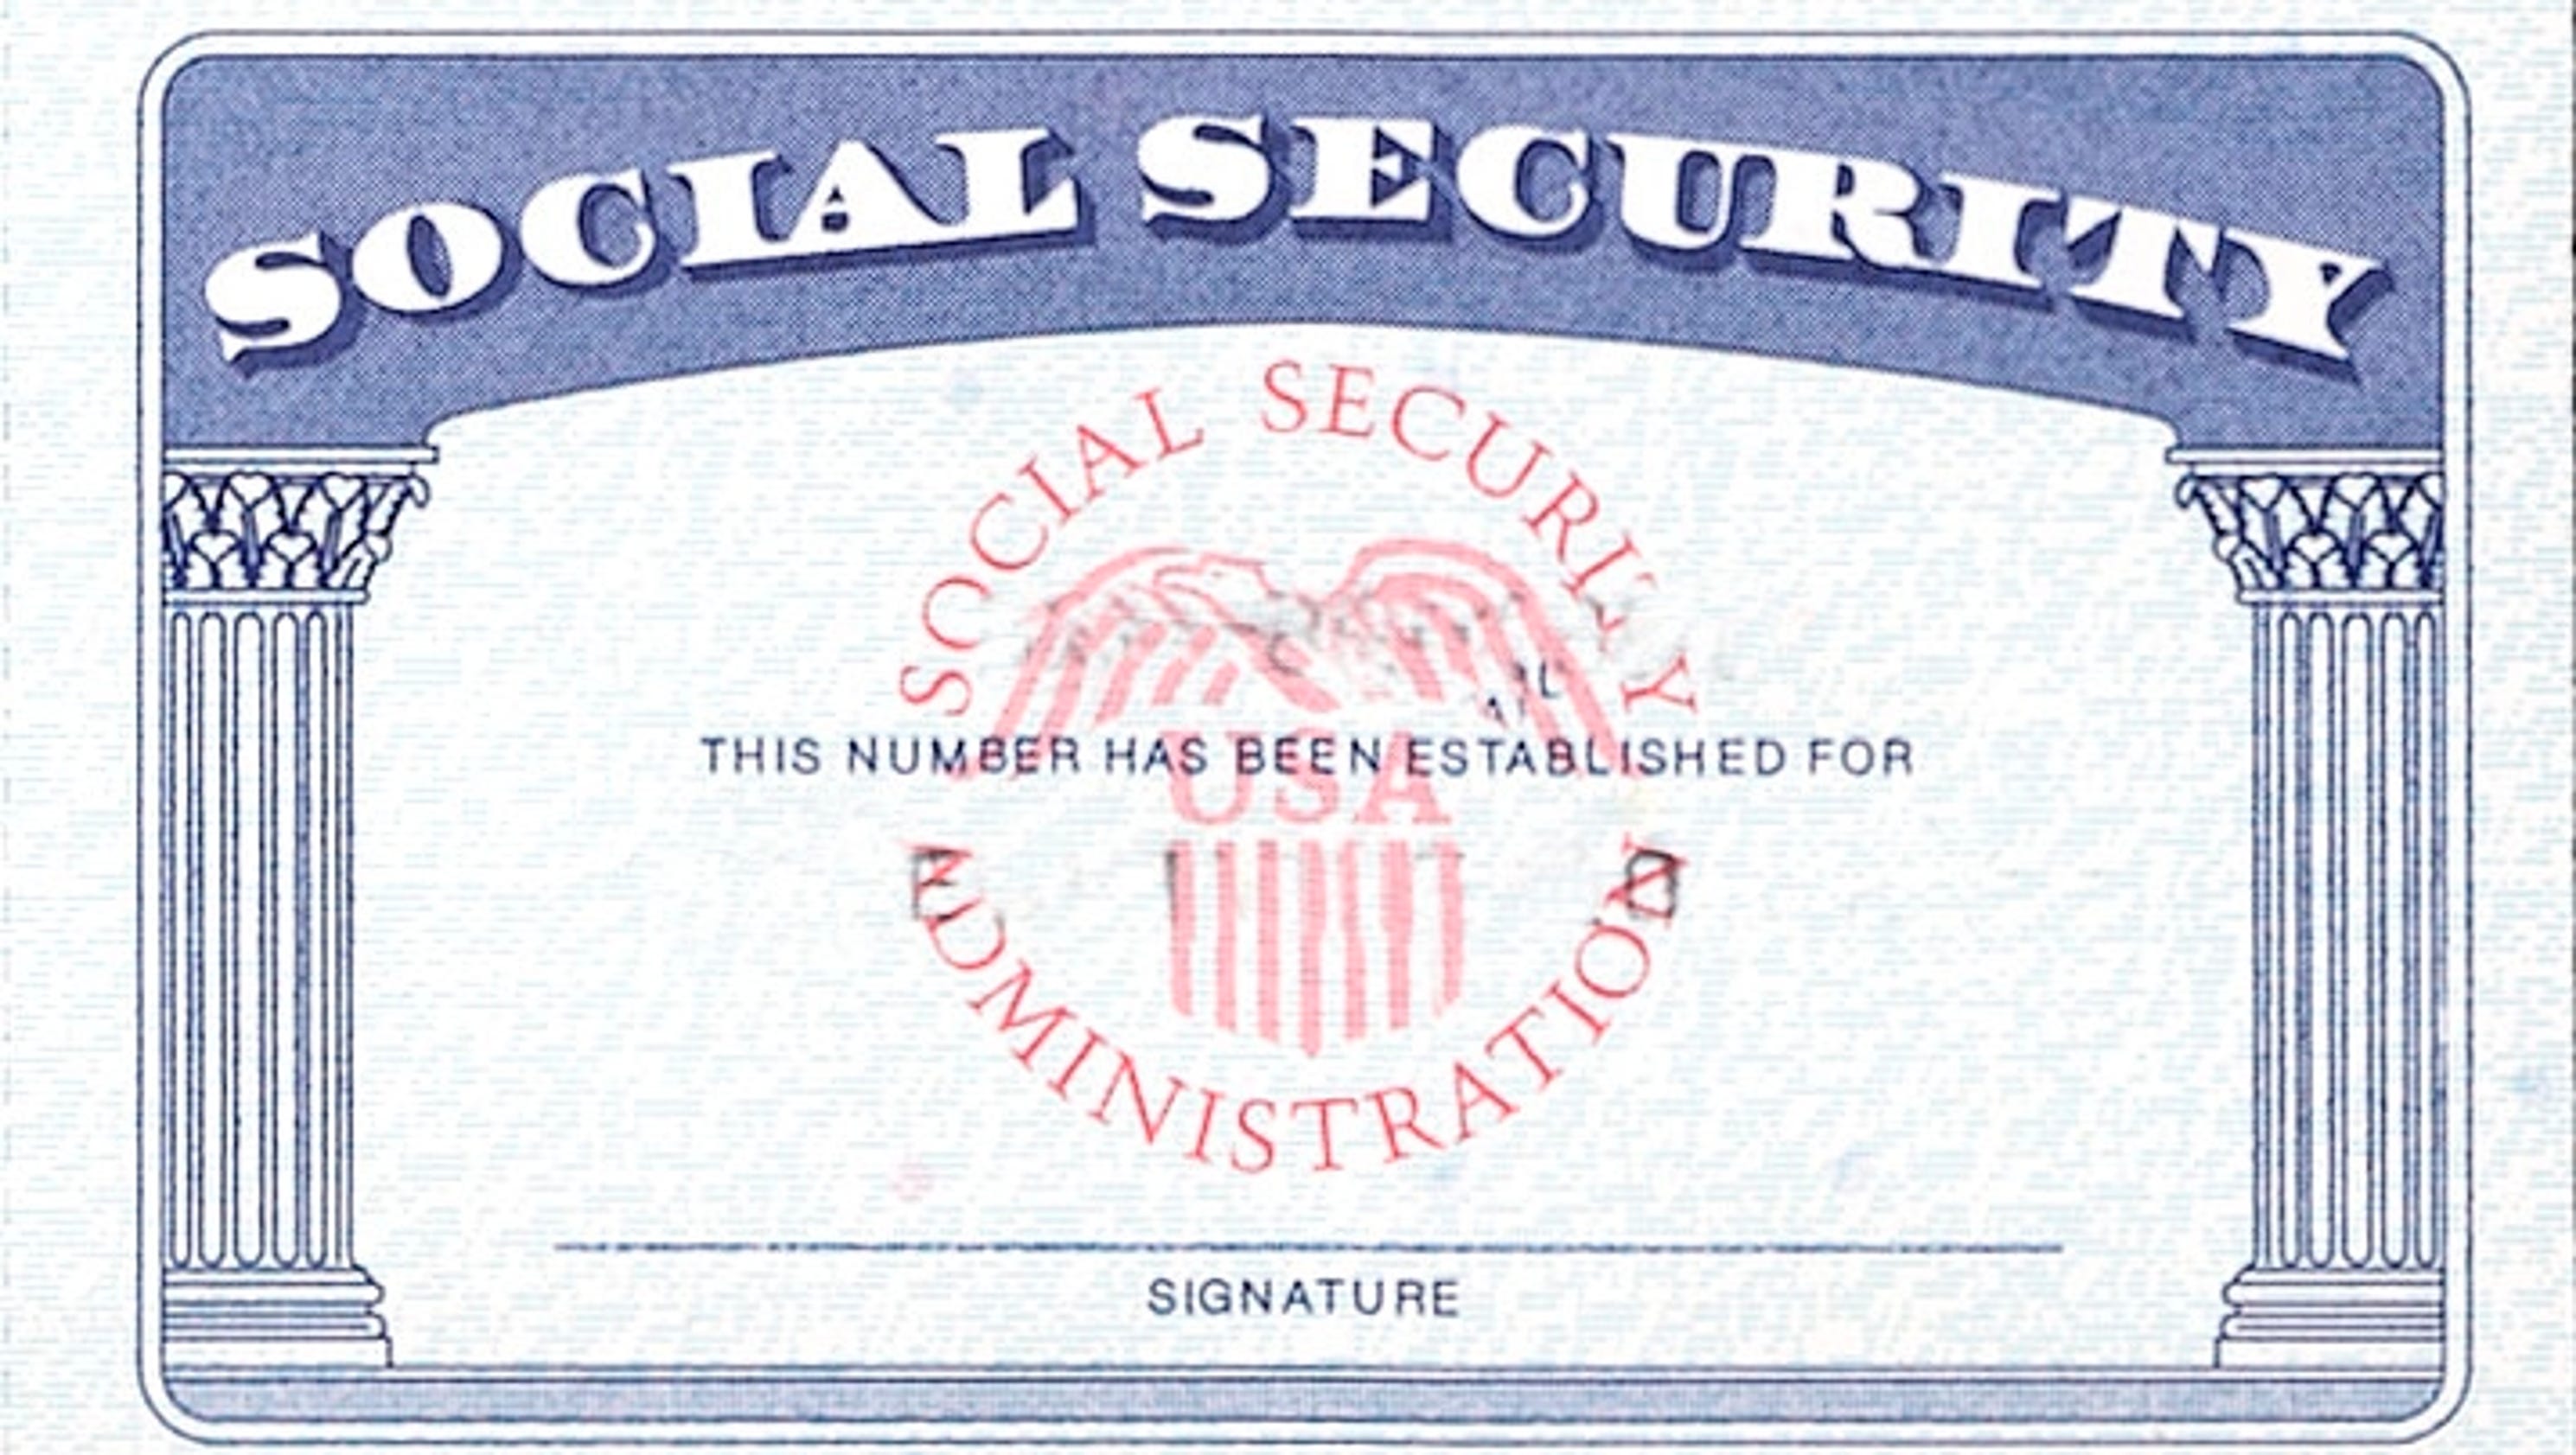 thousands-of-social-security-numbers-sent-in-email